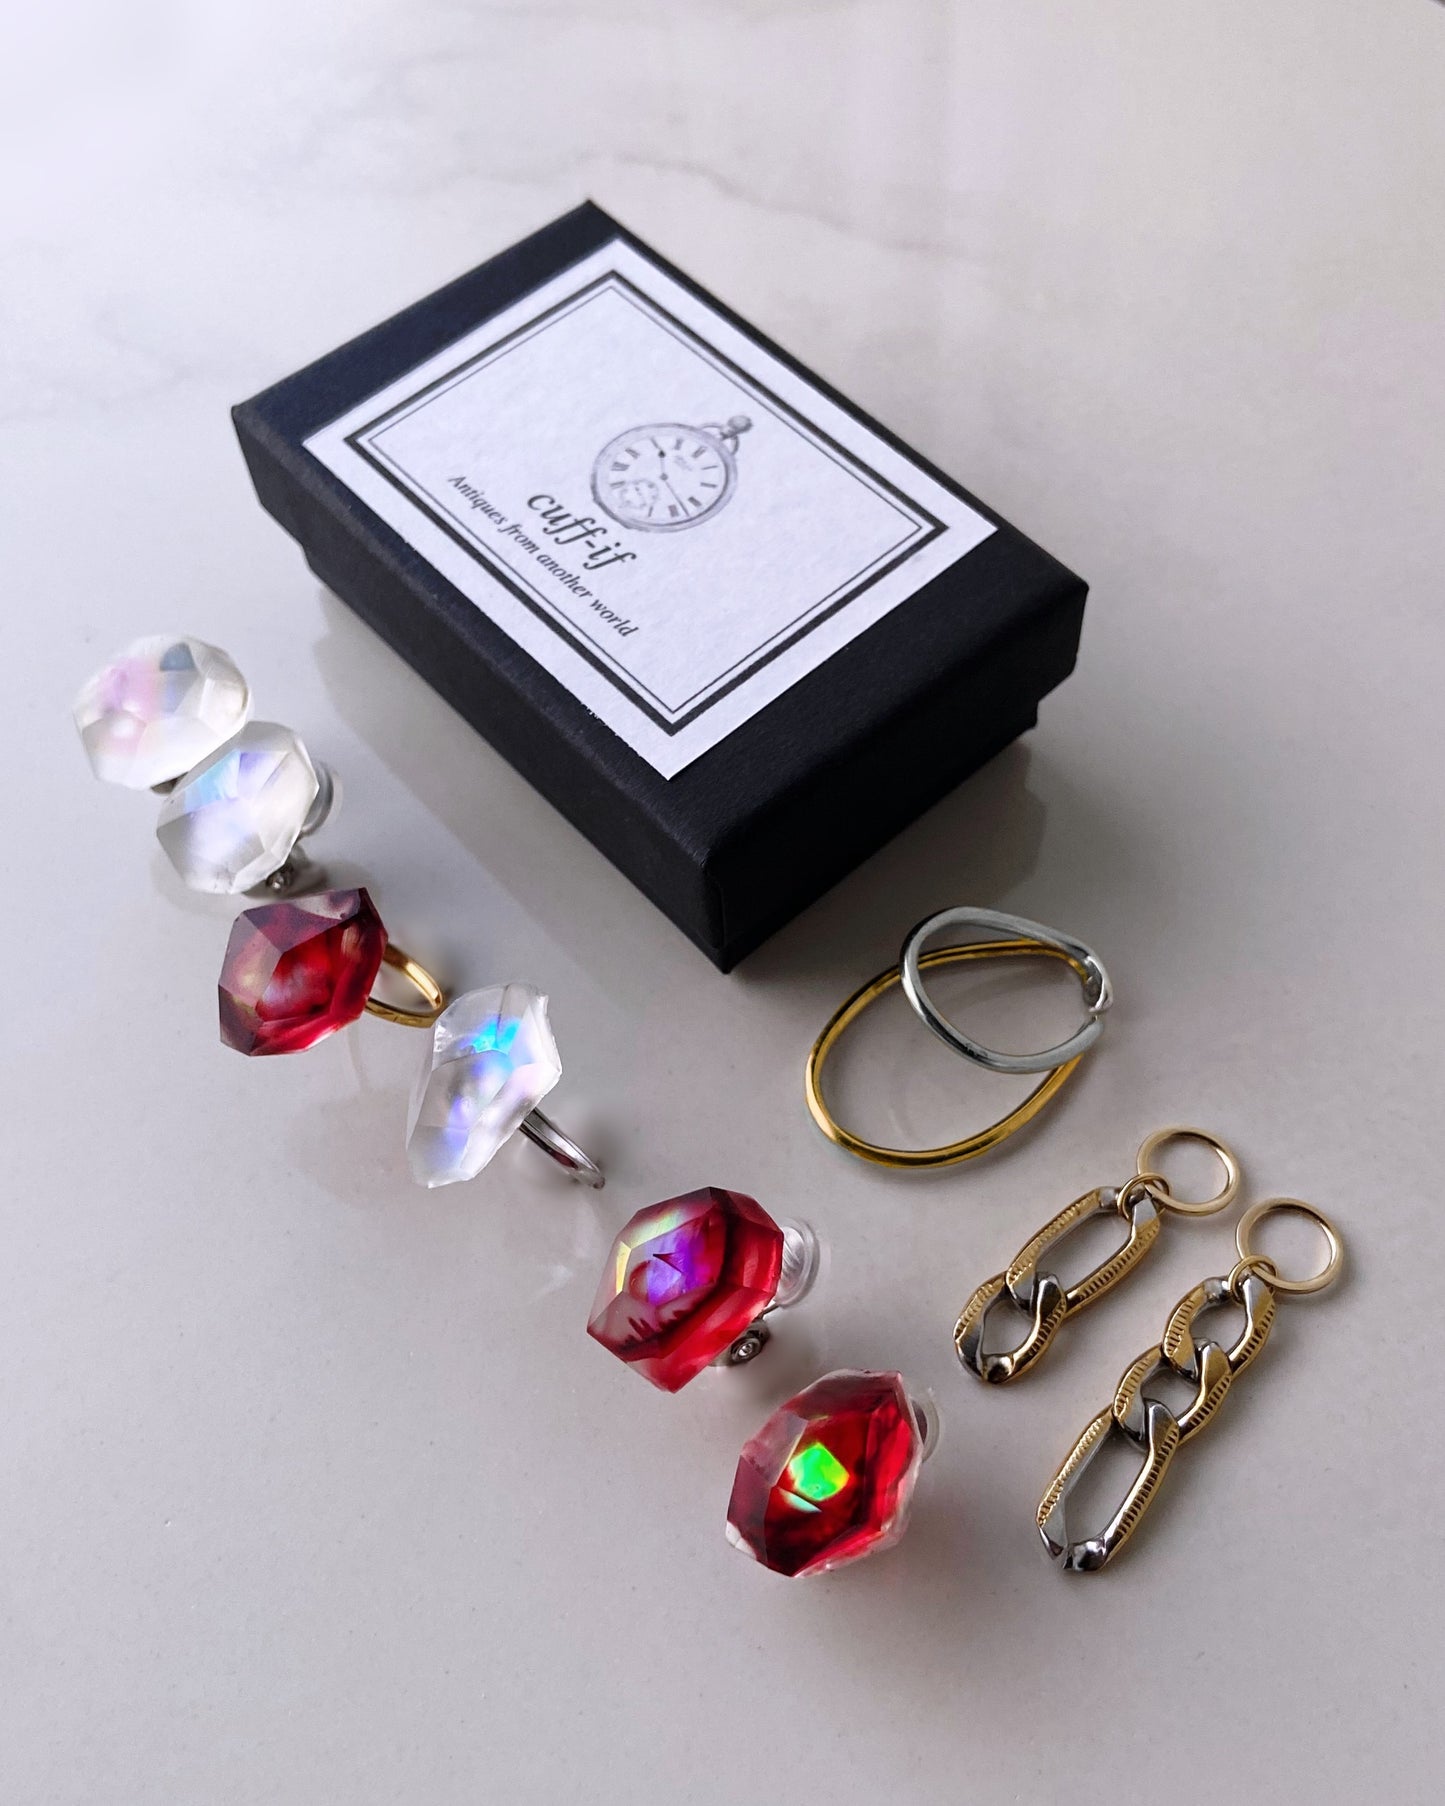 Custom double ring, ear cuff / Interchangeable /着せ替えダブルリング・イヤーカフ/ MIX/silver925